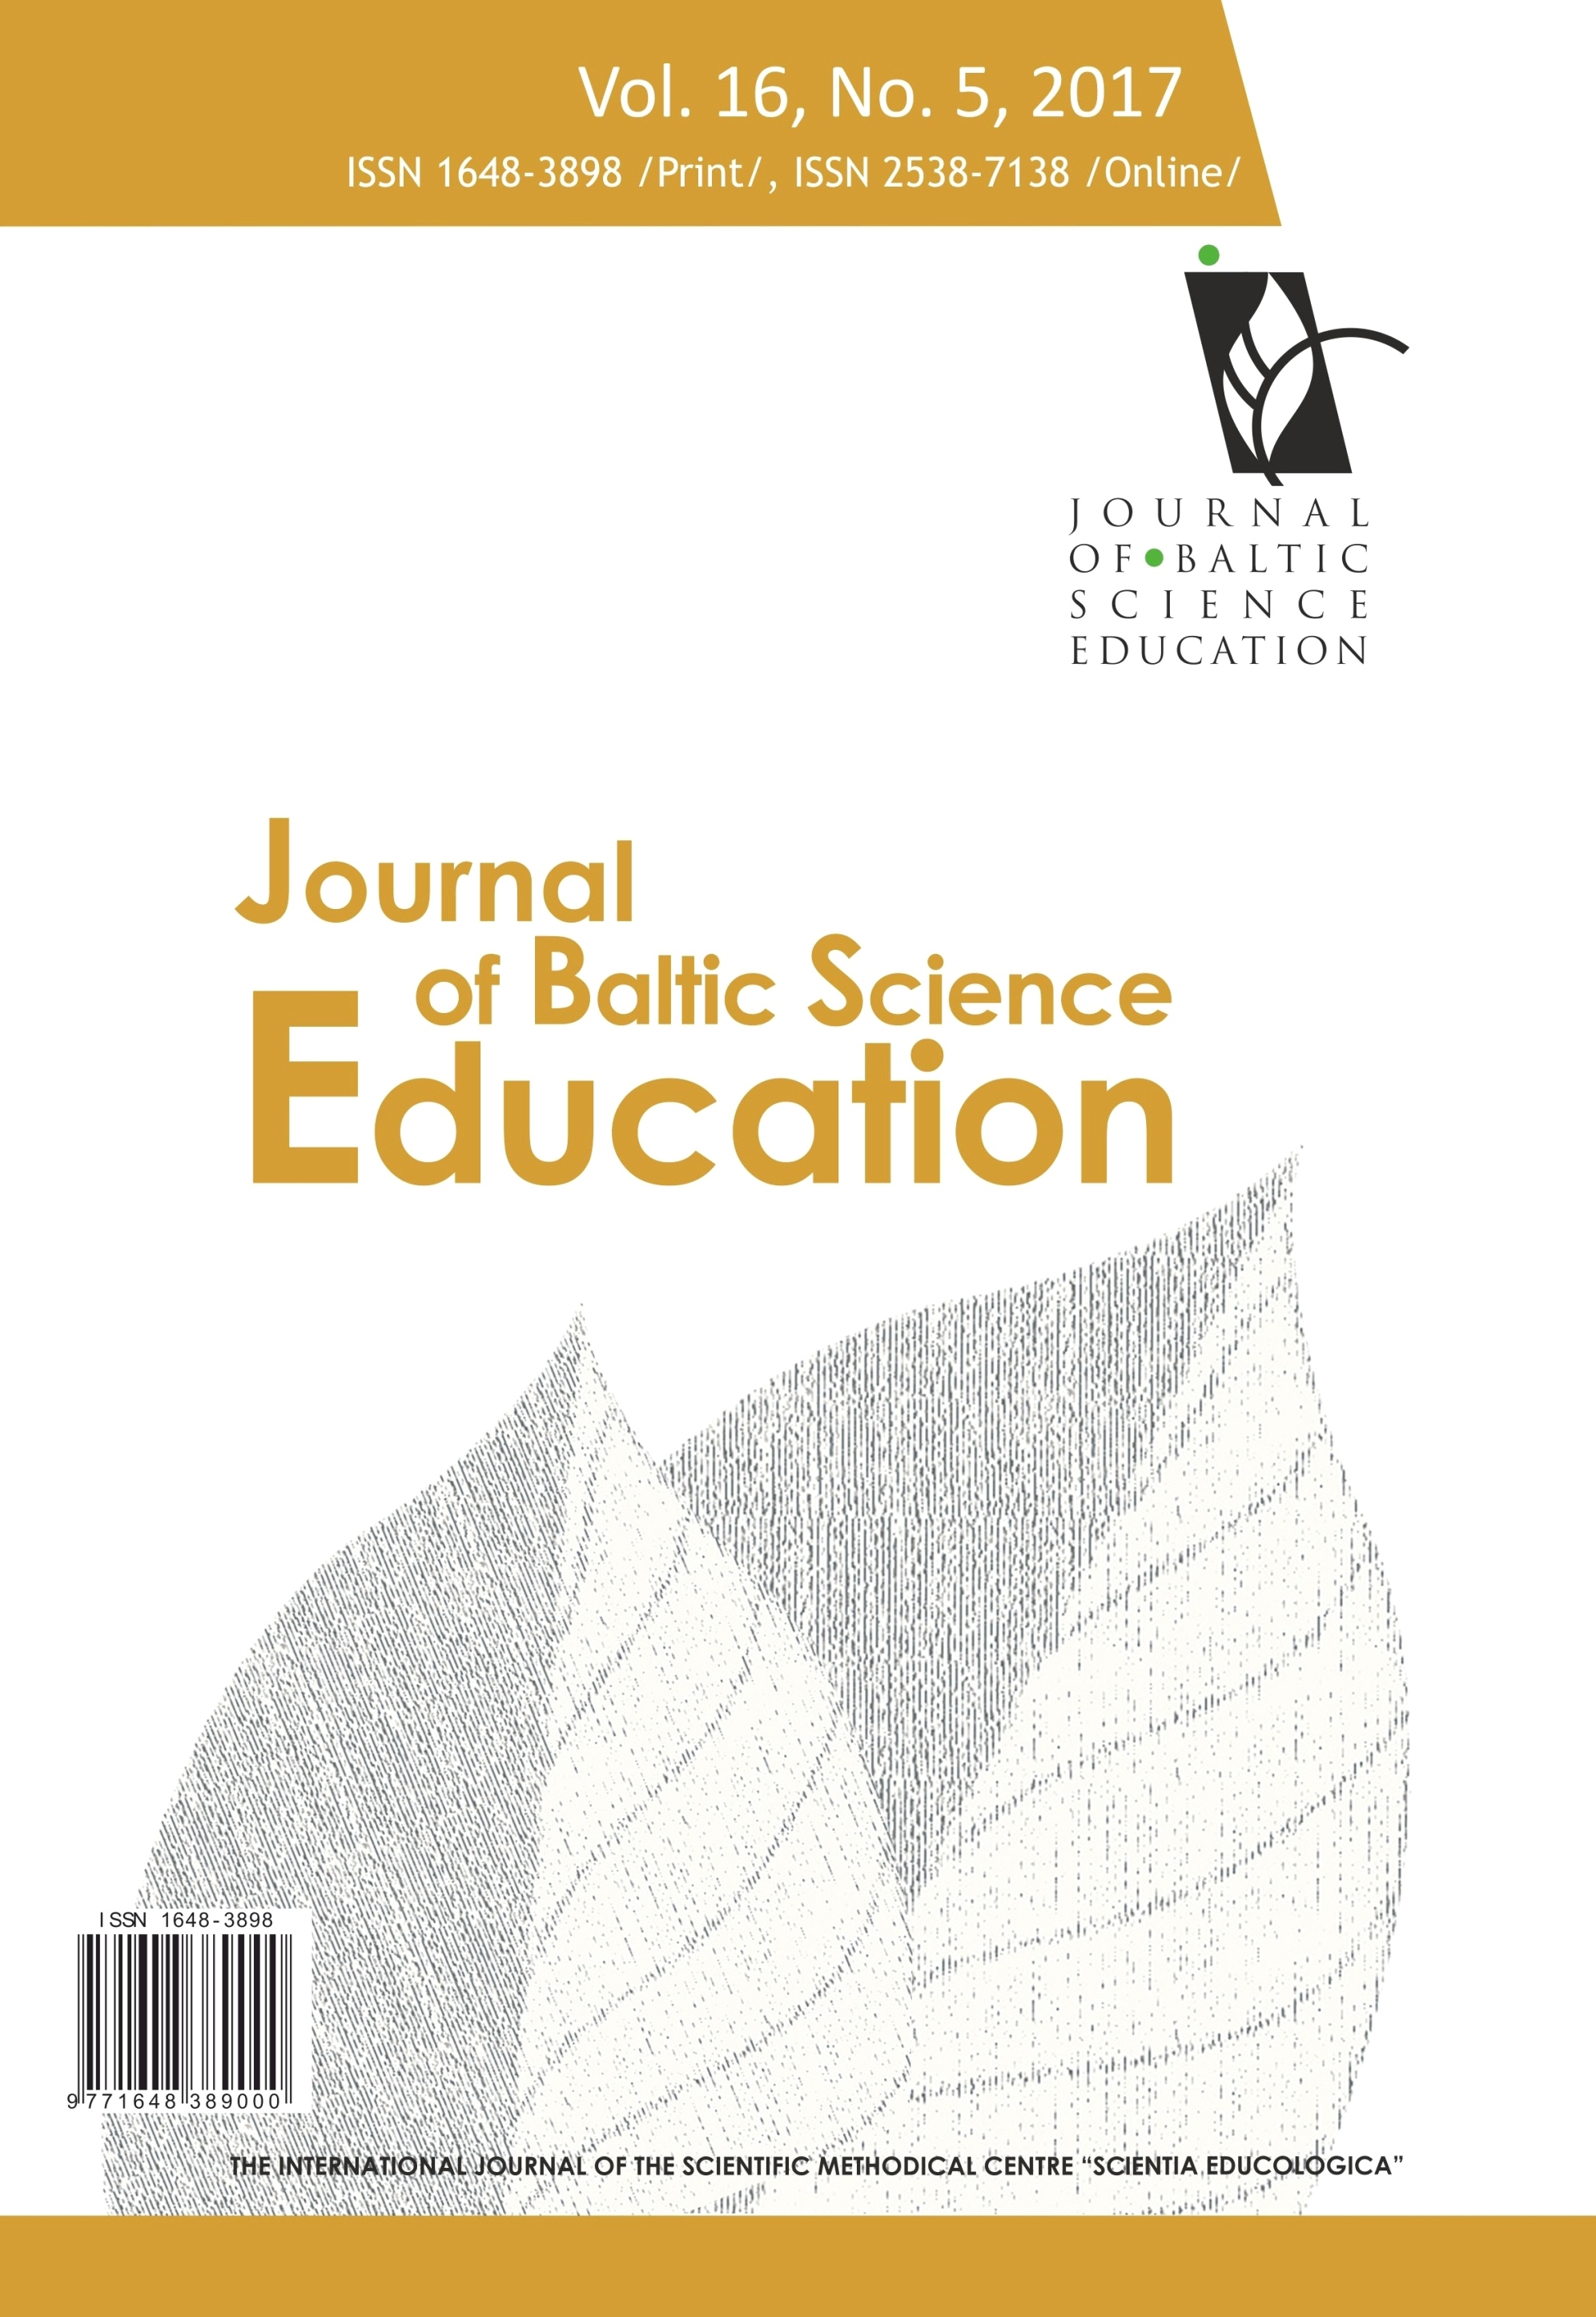 THE ECOLOGICAL WORLDVIEWS AND LOCAL ENVIRONMENTAL CONCERNS AMONG SECONDARY SCHOOL TEACHERS